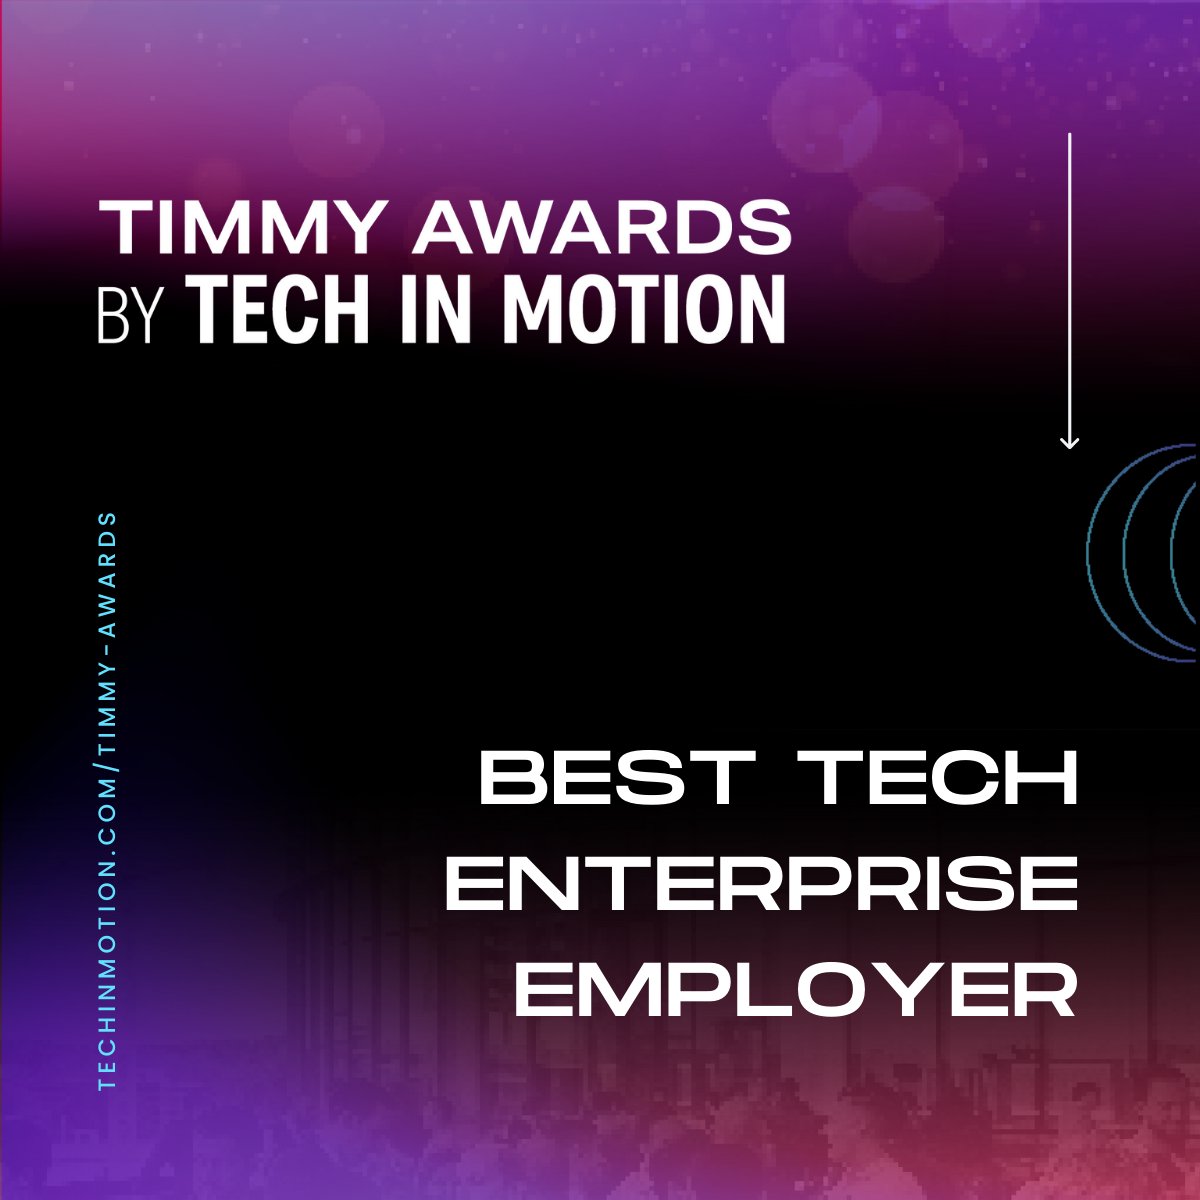 🚀 Nominations open for Best Tech Enterprise Employer at Timmy Awards! Recognizing those fostering tech growth, inclusion, and innovation. Nominate today! 🏆 #TimmyAwards #TechEnterpriseEmployer #Innovation #NominateNow hubs.la/Q02tND920